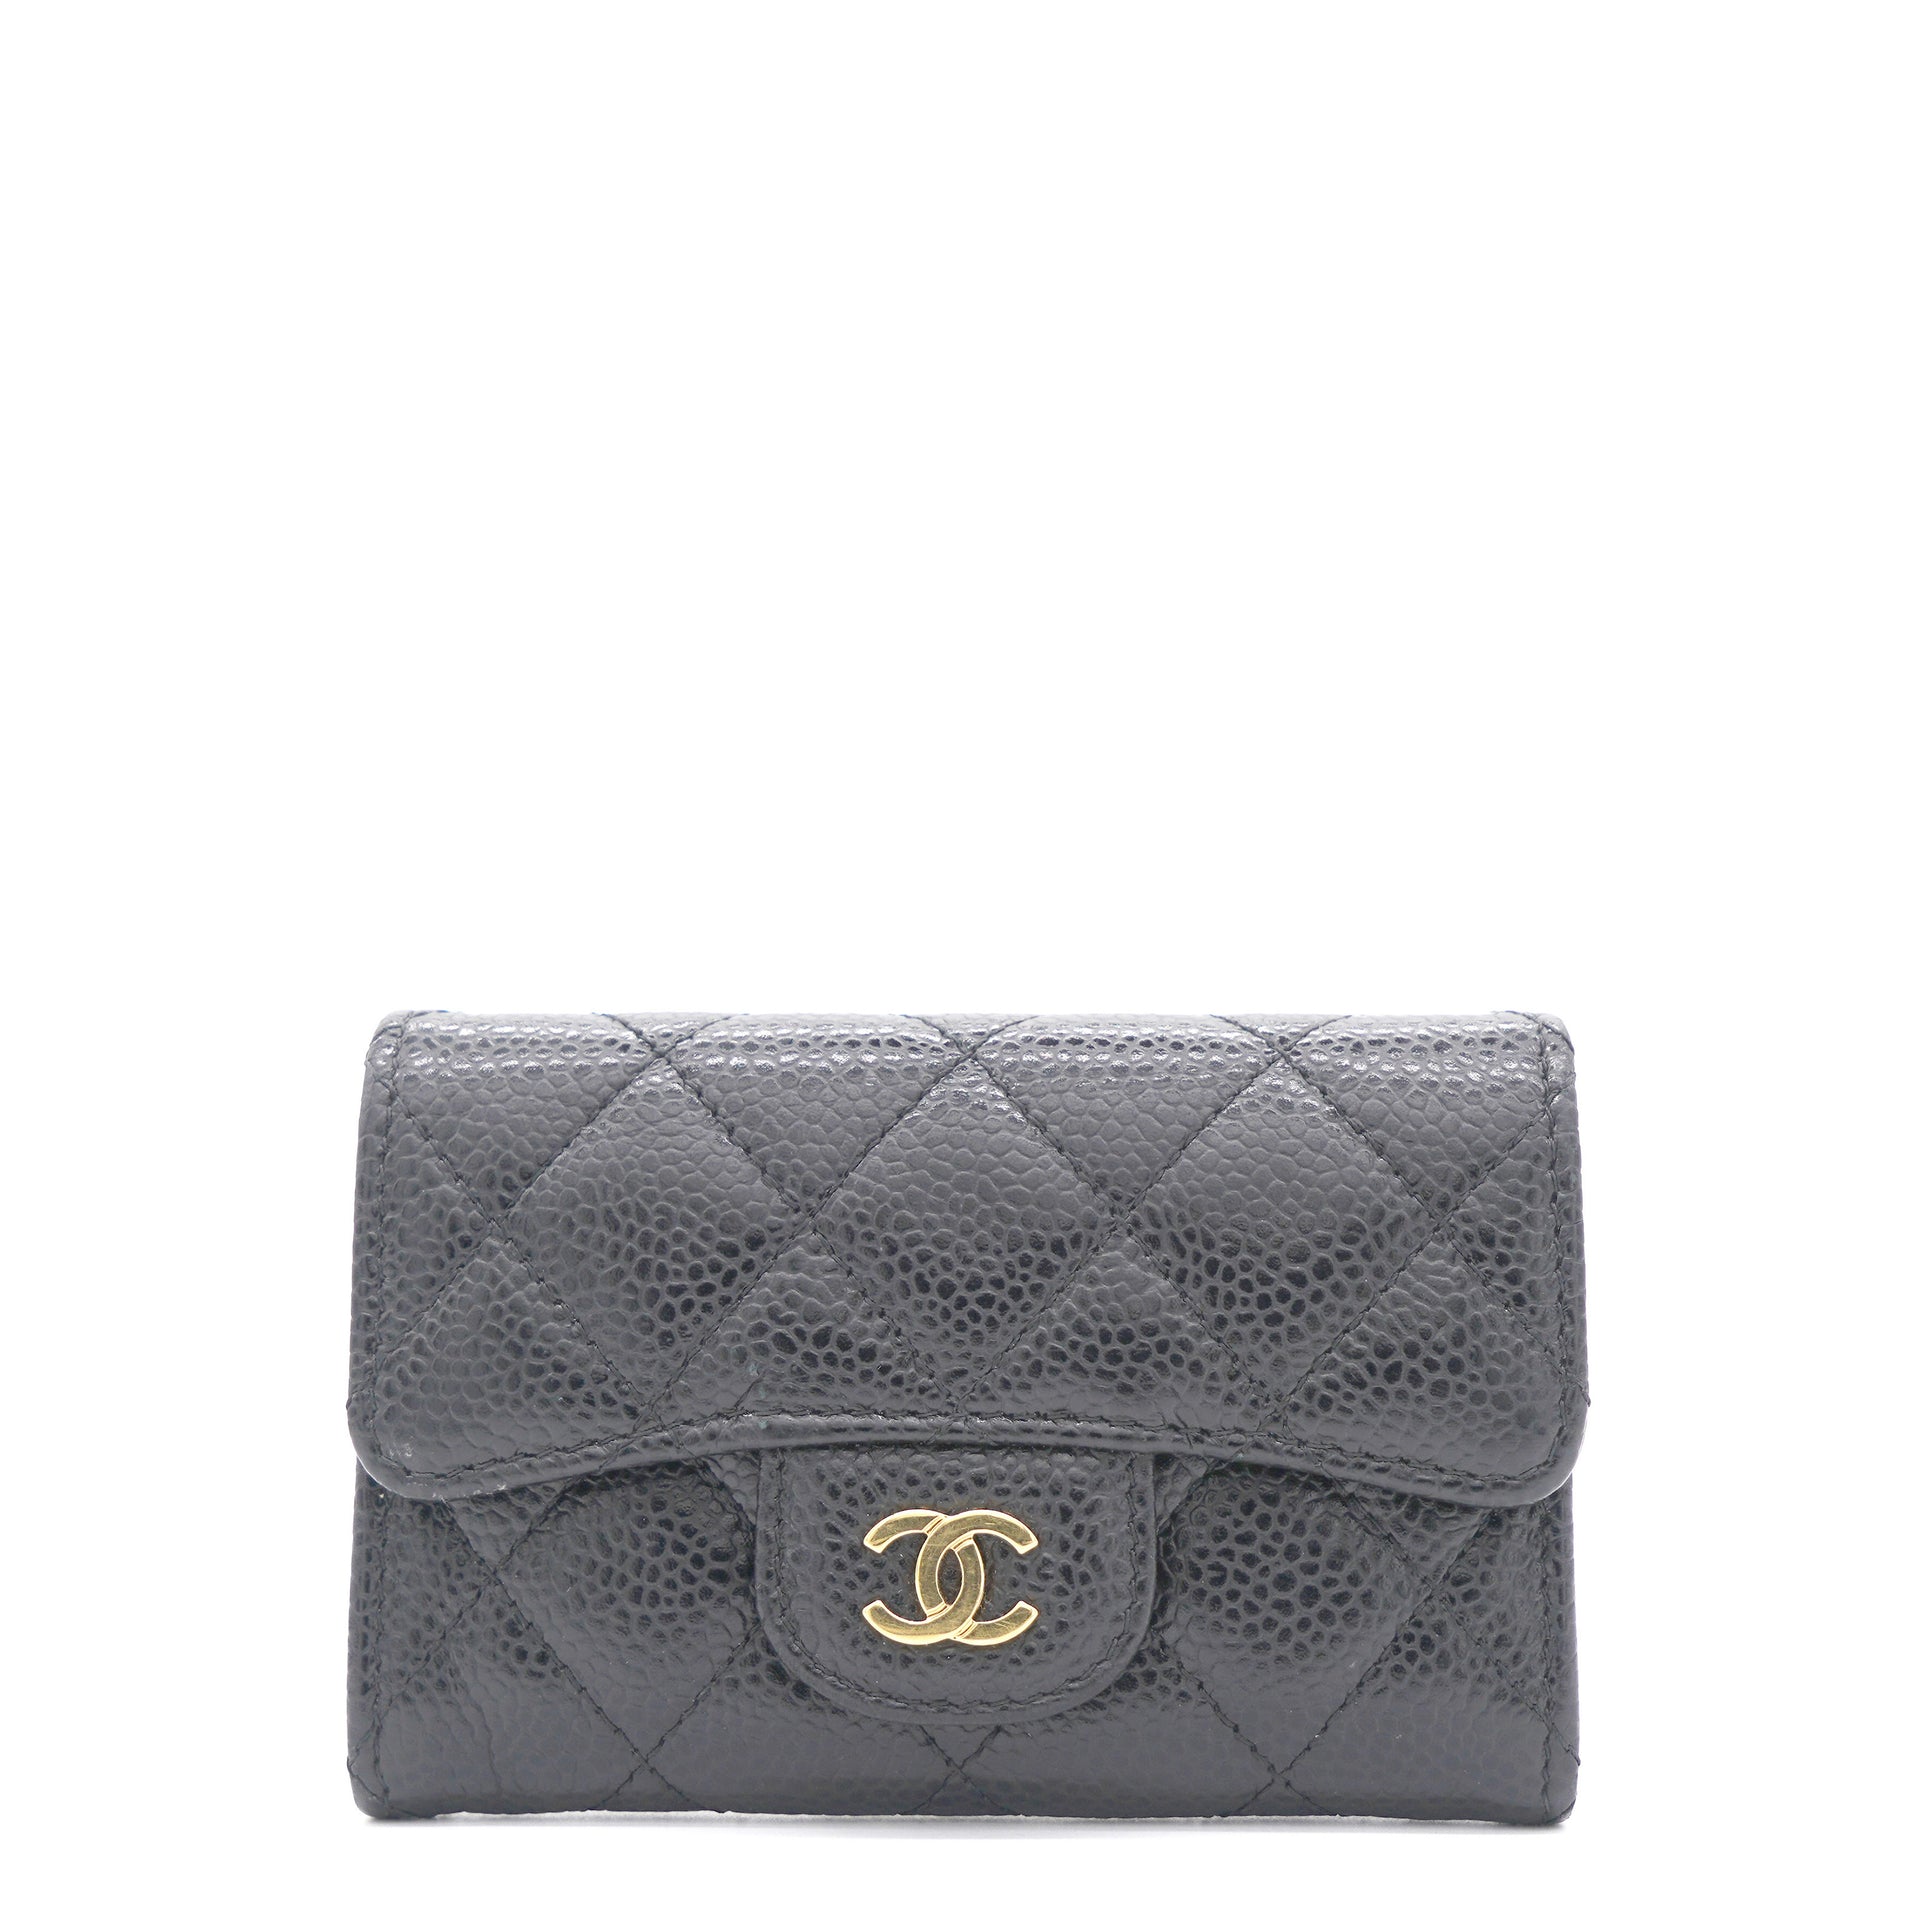 Chanel Classic Pink Small Flap Wallet New  eBay